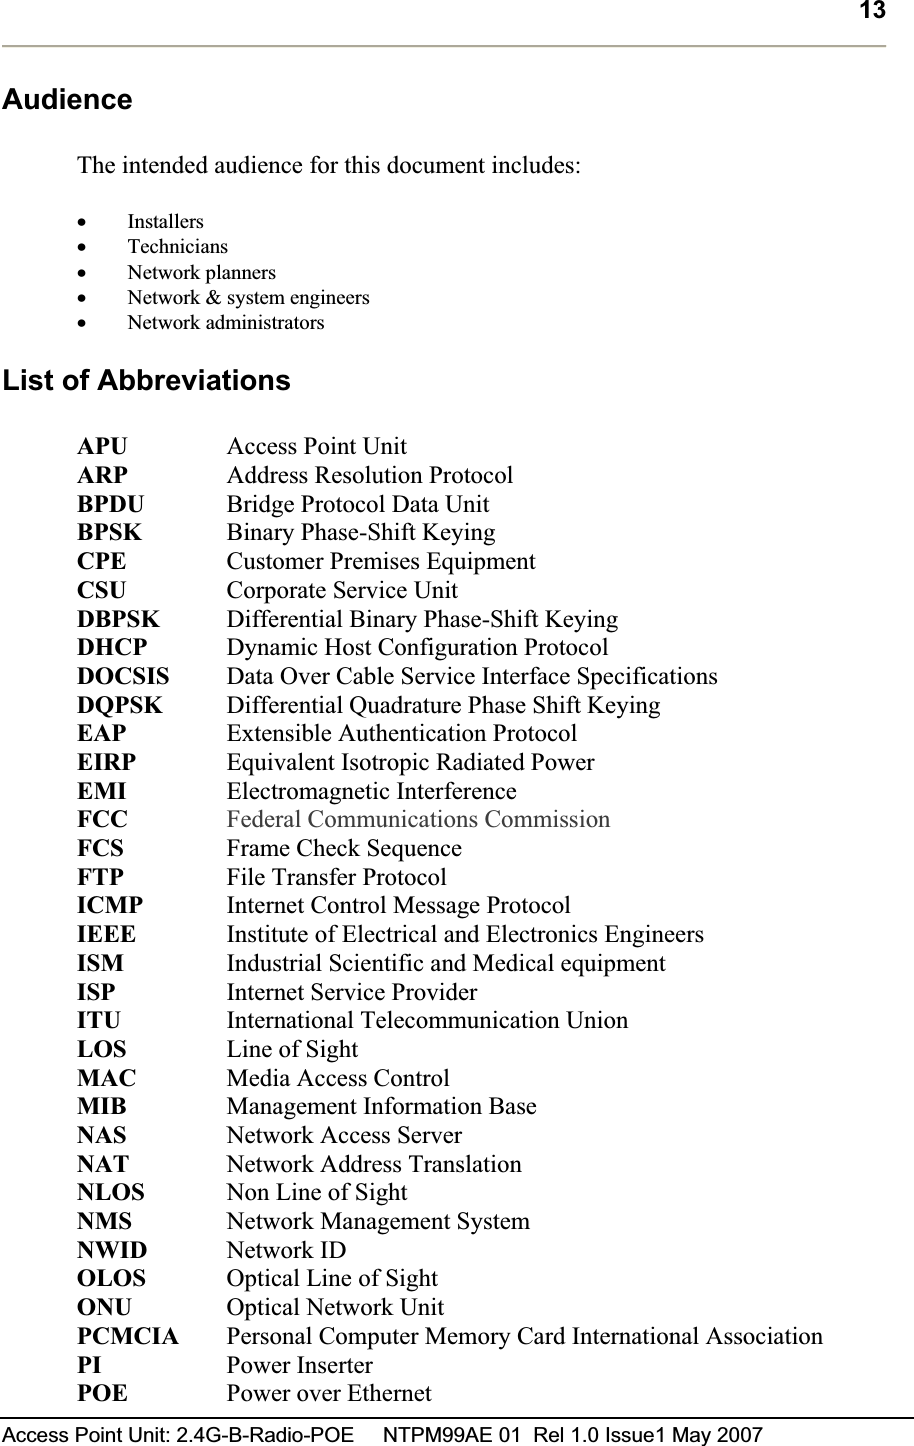 13Access Point Unit: 2.4G-B-Radio-POE     NTPM99AE 01  Rel 1.0 Issue1 May 2007 AudienceThe intended audience for this document includes: xInstallersxTechniciansxNetwork plannersxNetwork &amp; system engineersxNetwork administrators List of Abbreviations APU Access Point Unit ARP   Address Resolution Protocol BPDU   Bridge Protocol Data Unit BPSK   Binary Phase-Shift KeyingCPE   Customer Premises EquipmentCSU Corporate Service Unit DBPSK  Differential Binary Phase-Shift KeyingDHCP   Dynamic Host Configuration ProtocolDOCSIS  Data Over Cable Service Interface Specifications DQPSK Differential Quadrature Phase Shift KeyingEAP   Extensible Authentication ProtocolEIRP   Equivalent Isotropic Radiated PowerEMI Electromagnetic InterferenceFCC Federal Communications CommissionFCS Frame Check Sequence FTP File Transfer Protocol ICMP   Internet Control Message ProtocolIEEE   Institute of Electrical and Electronics EngineersISM Industrial Scientific and Medical equipmentISP Internet Service Provider ITU International Telecommunication UnionLOS Line of Sight MAC Media Access Control MIB Management Information BaseNAS   Network Access Server NAT   Network Address Translation NLOS   Non Line of Sight NMS Network Management SystemNWID   Network ID OLOS   Optical Line of Sight ONU Optical Network Unit PCMCIA Personal Computer Memory Card International AssociationPI   Power Inserter POE Power over Ethernet 